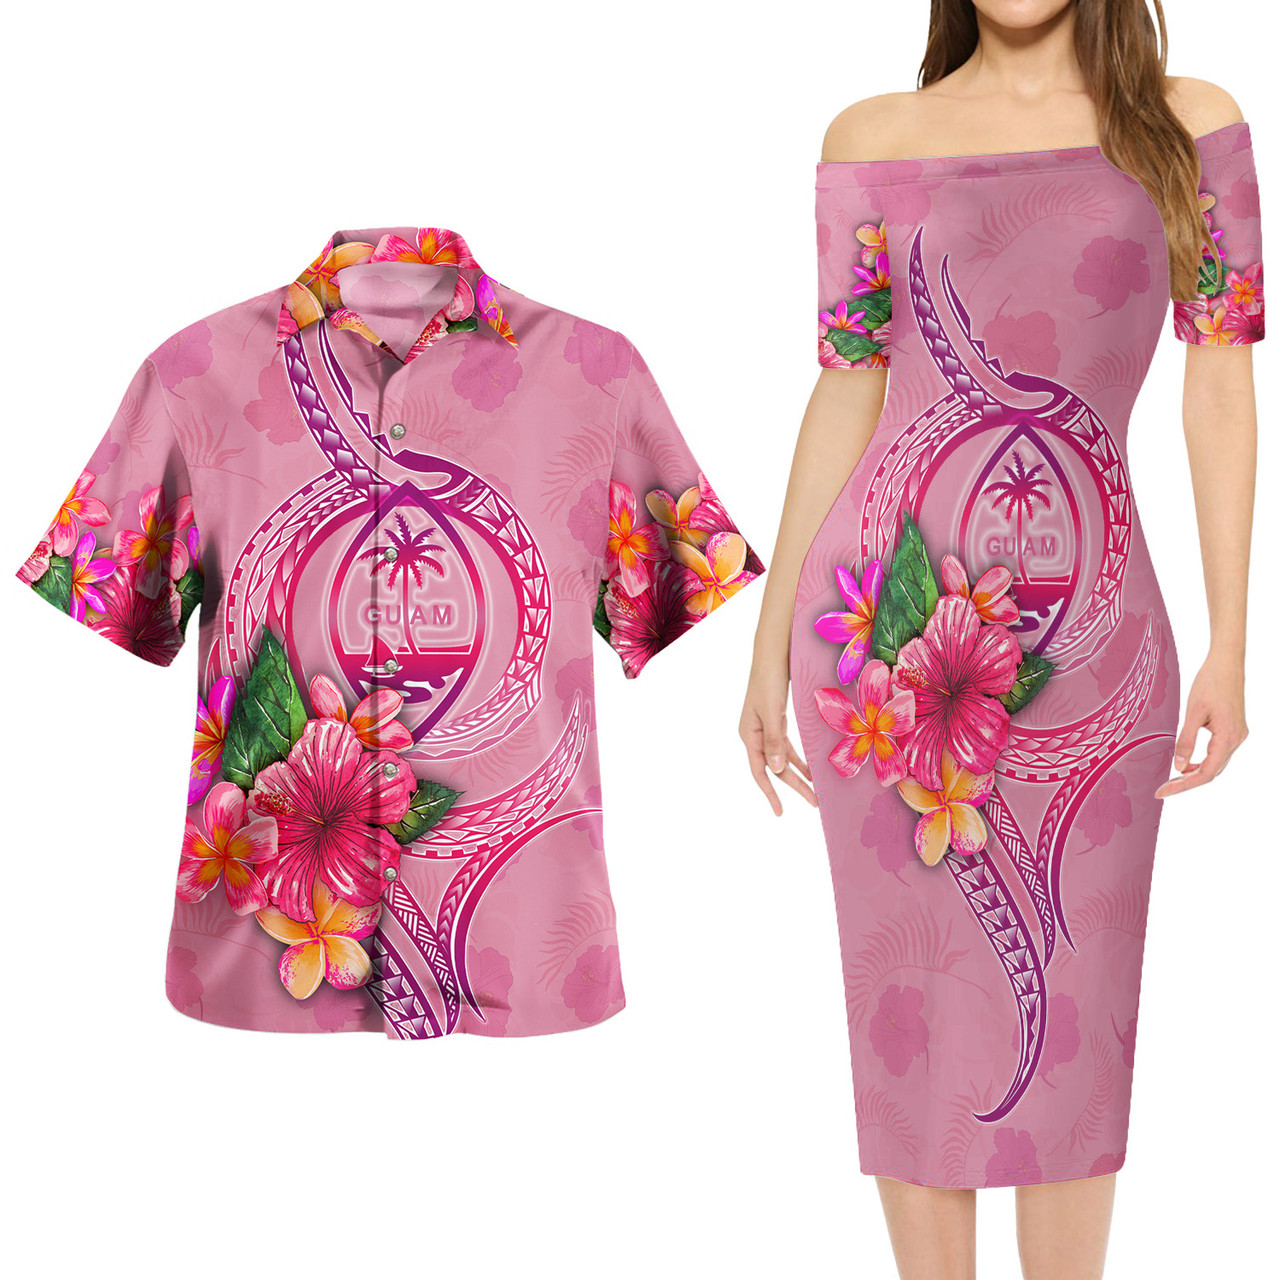 Guam Combo Short Sleeve Dress And Shirt Floral With Seal Pink